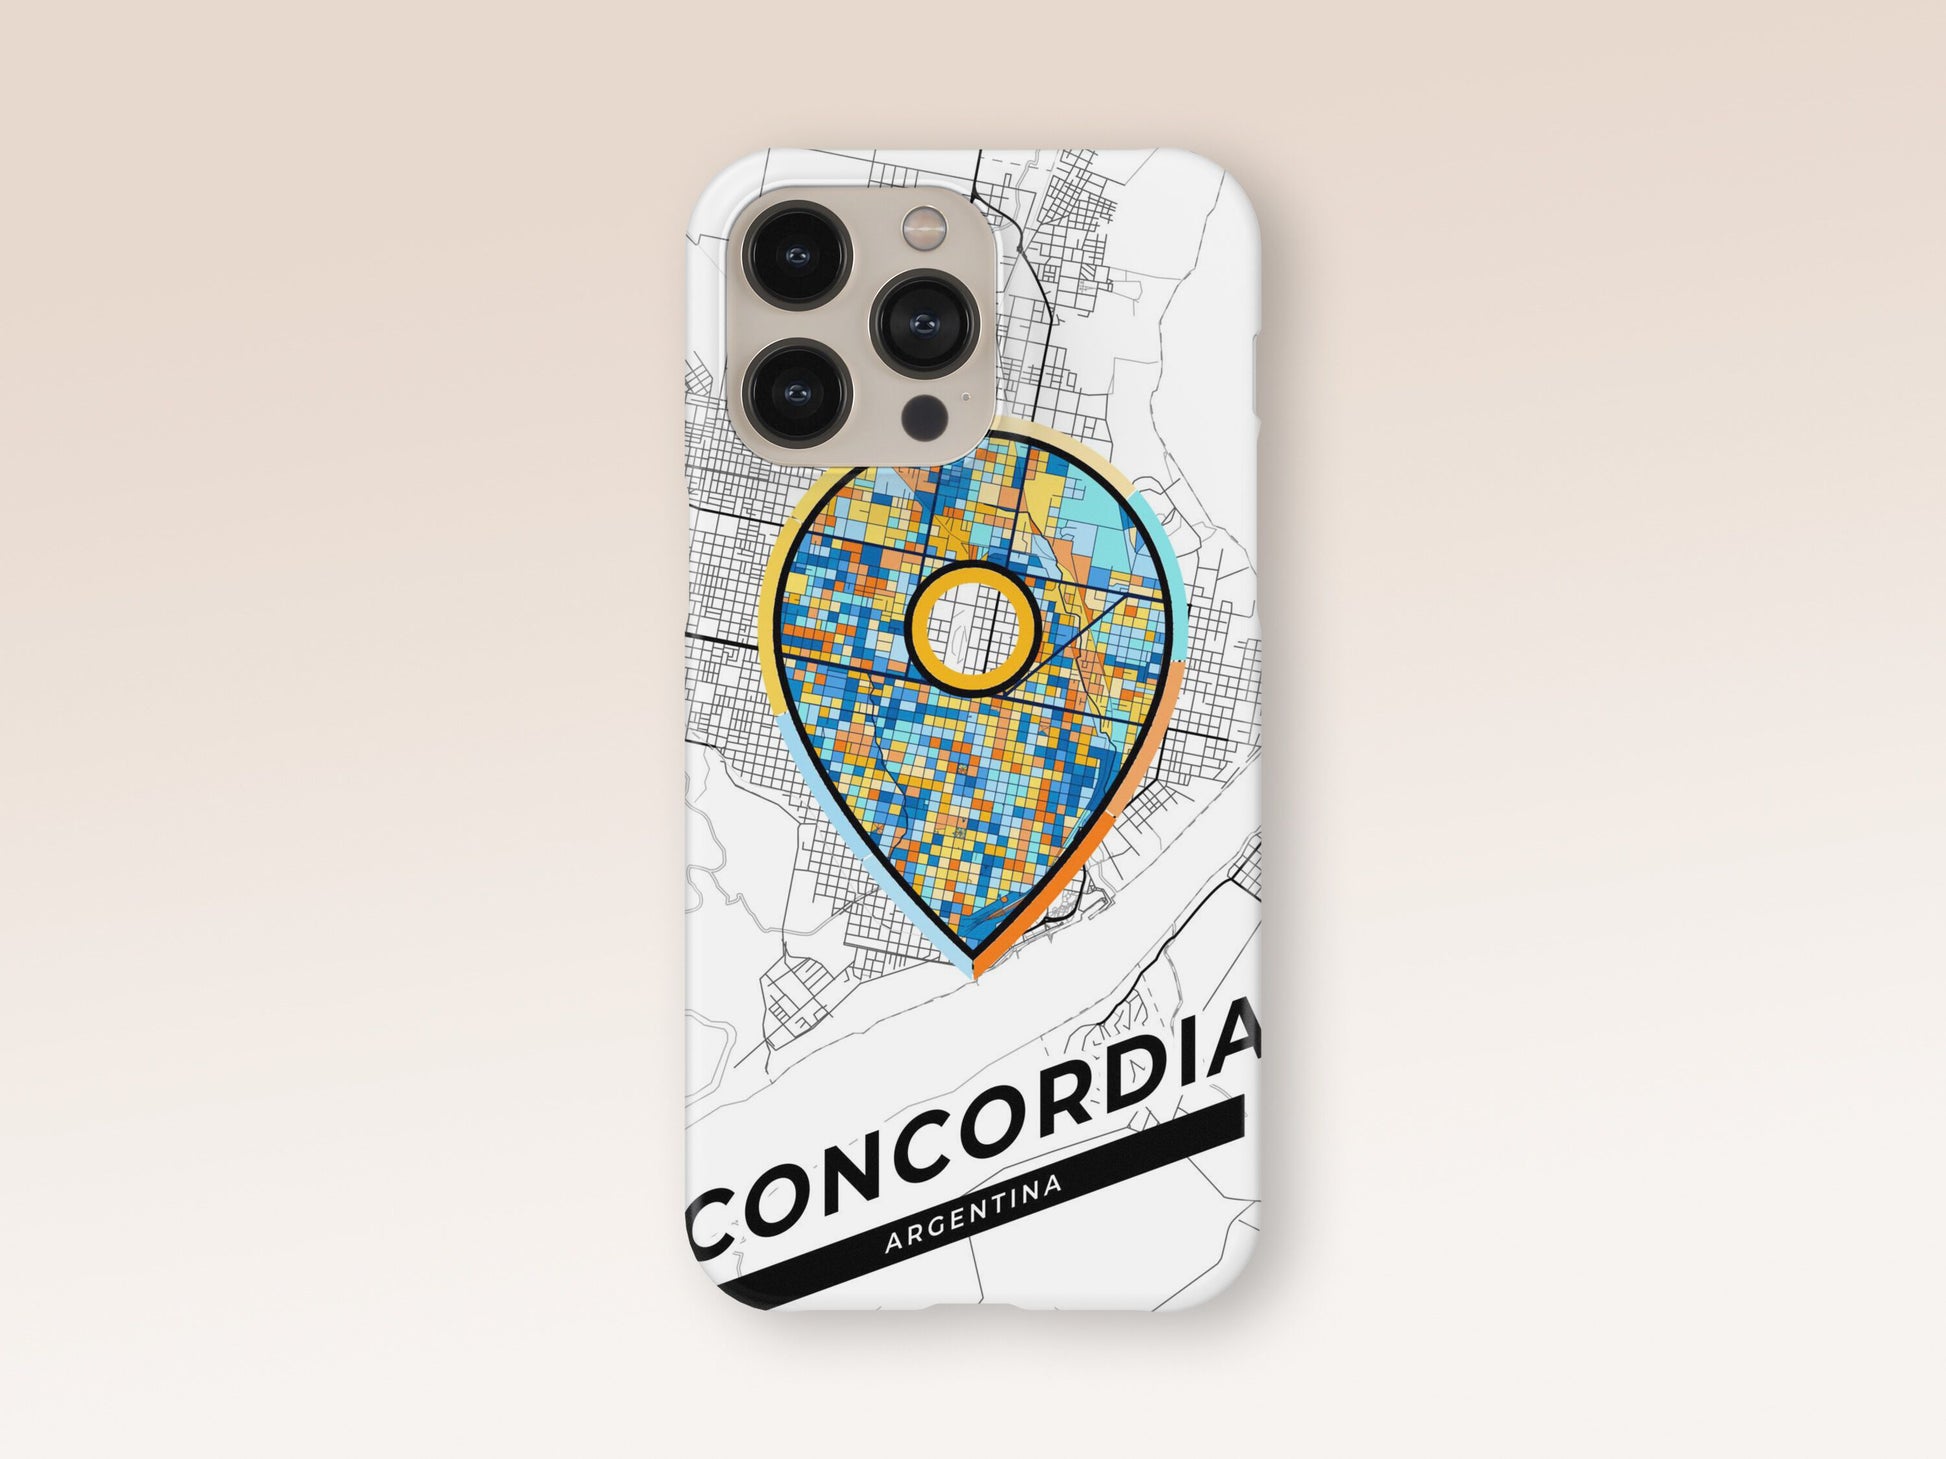 Concordia Argentina slim phone case with colorful icon. Birthday, wedding or housewarming gift. Couple match cases. 1